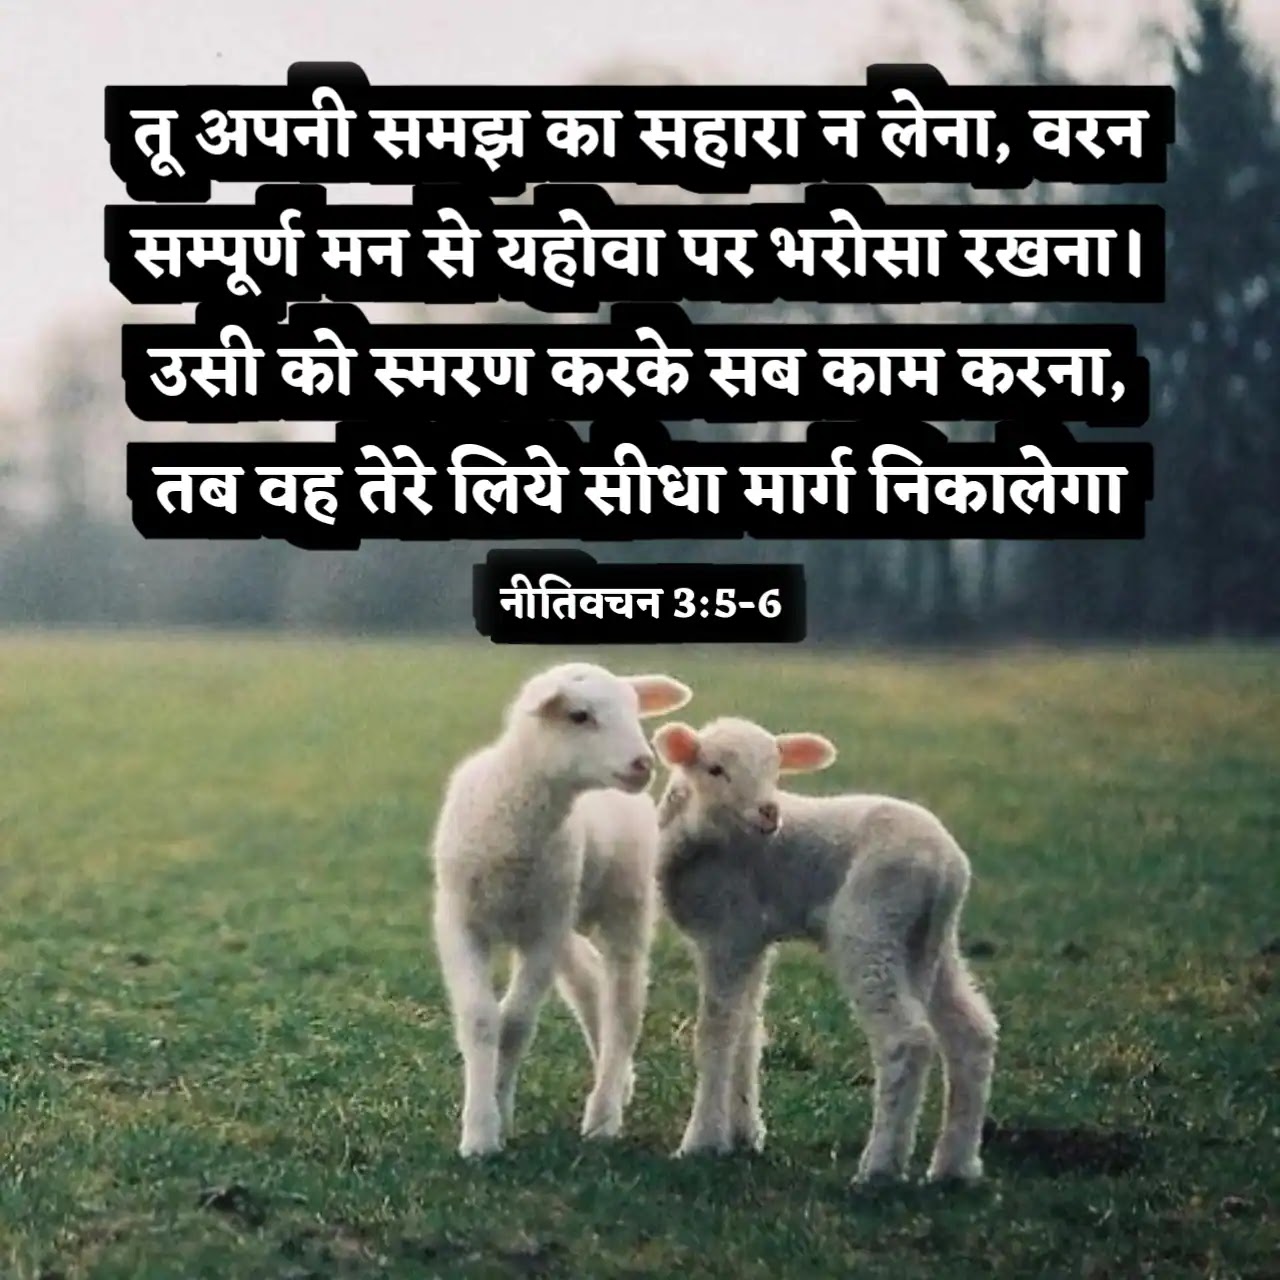 संकट के समय बाइबल वचन (Bible Verses In Times Of Trouble)